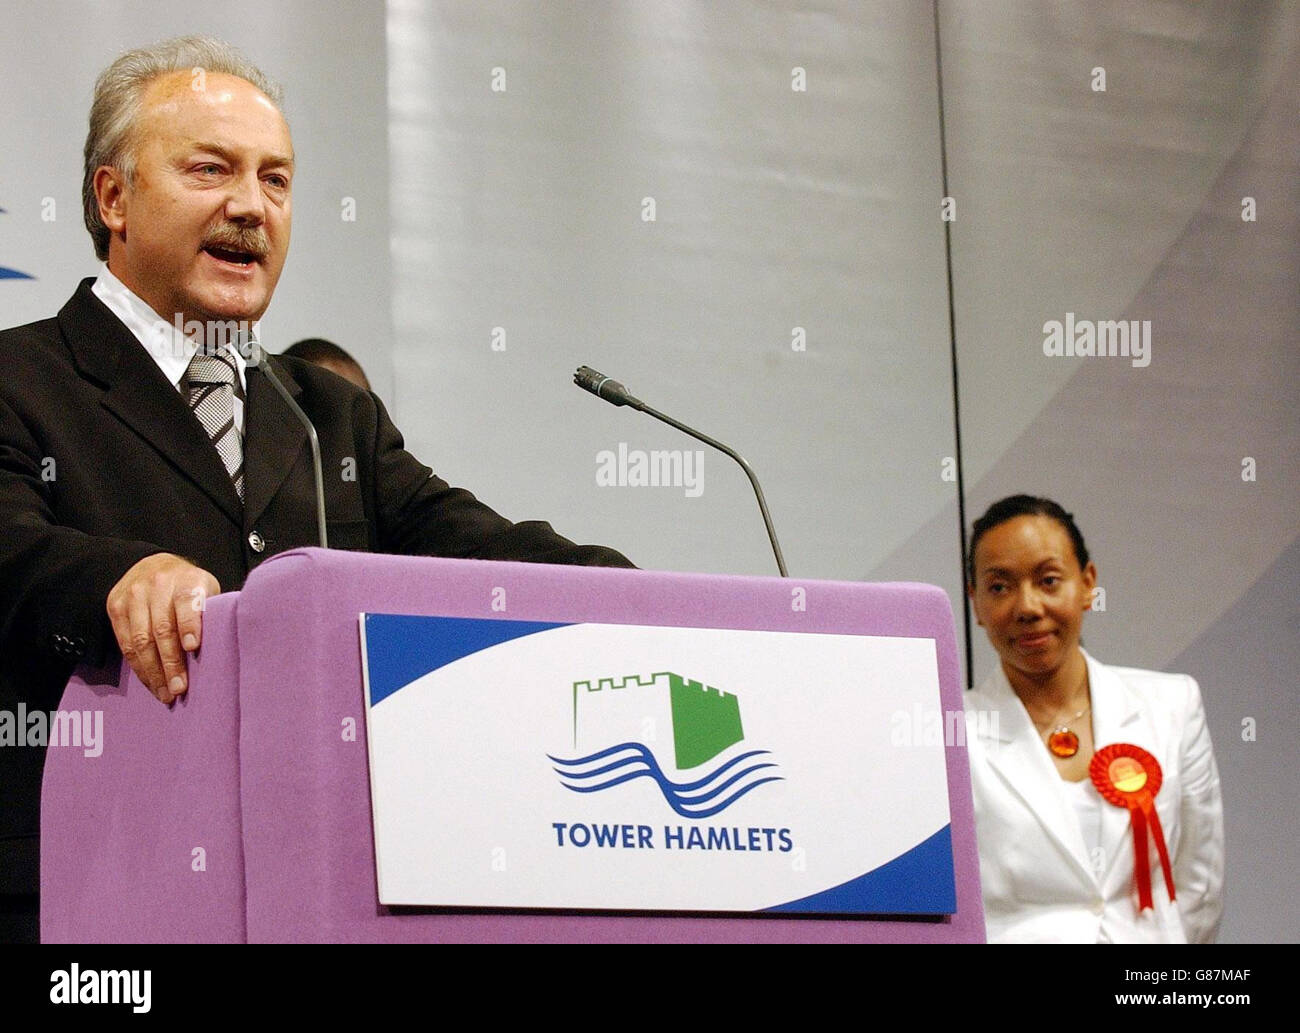 Former Labour MP George Galloway speaks after being elected as MP for the Bethnal Green & Bow constituency at the East Winter Gardens, London. Galloway, standing as a Respect party candidate, beat previous Labour MP Oona King (right) for the seat which had been held by Labour since 1945. Stock Photo